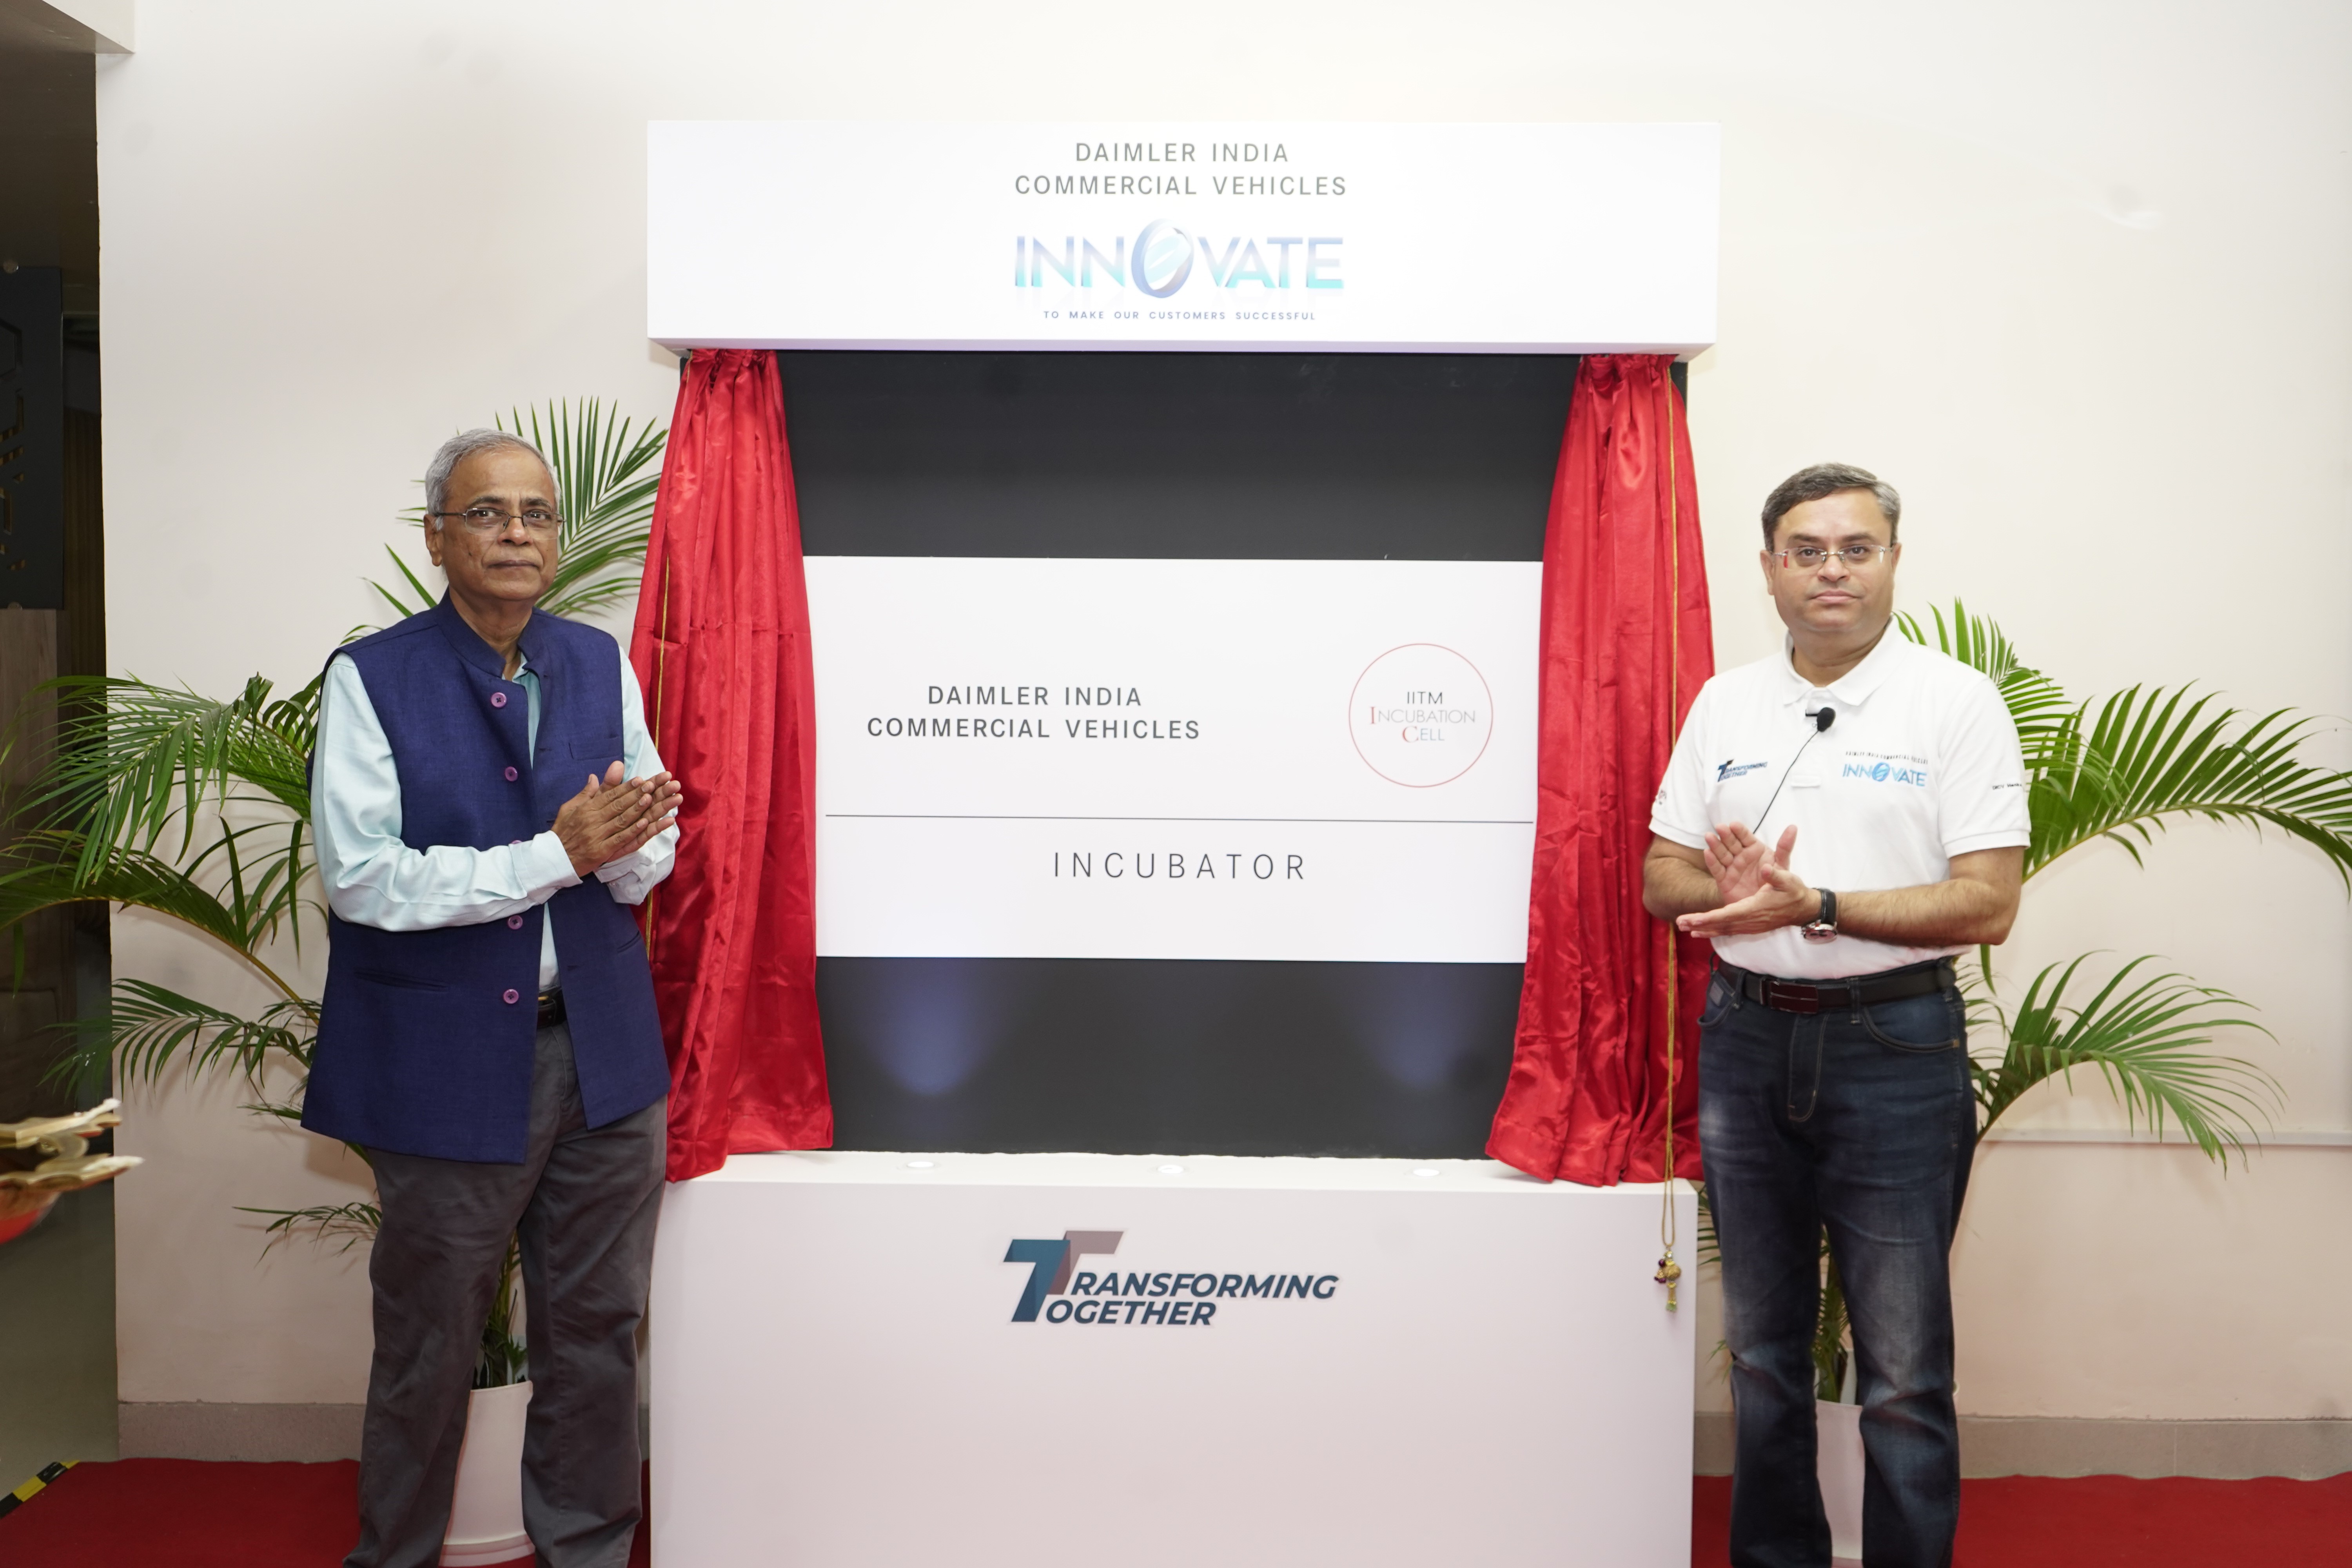 Daimler India Commercial Vehicles Partners with IIT Madras Incubation Cell to Accelerate Future Mobility Solutions